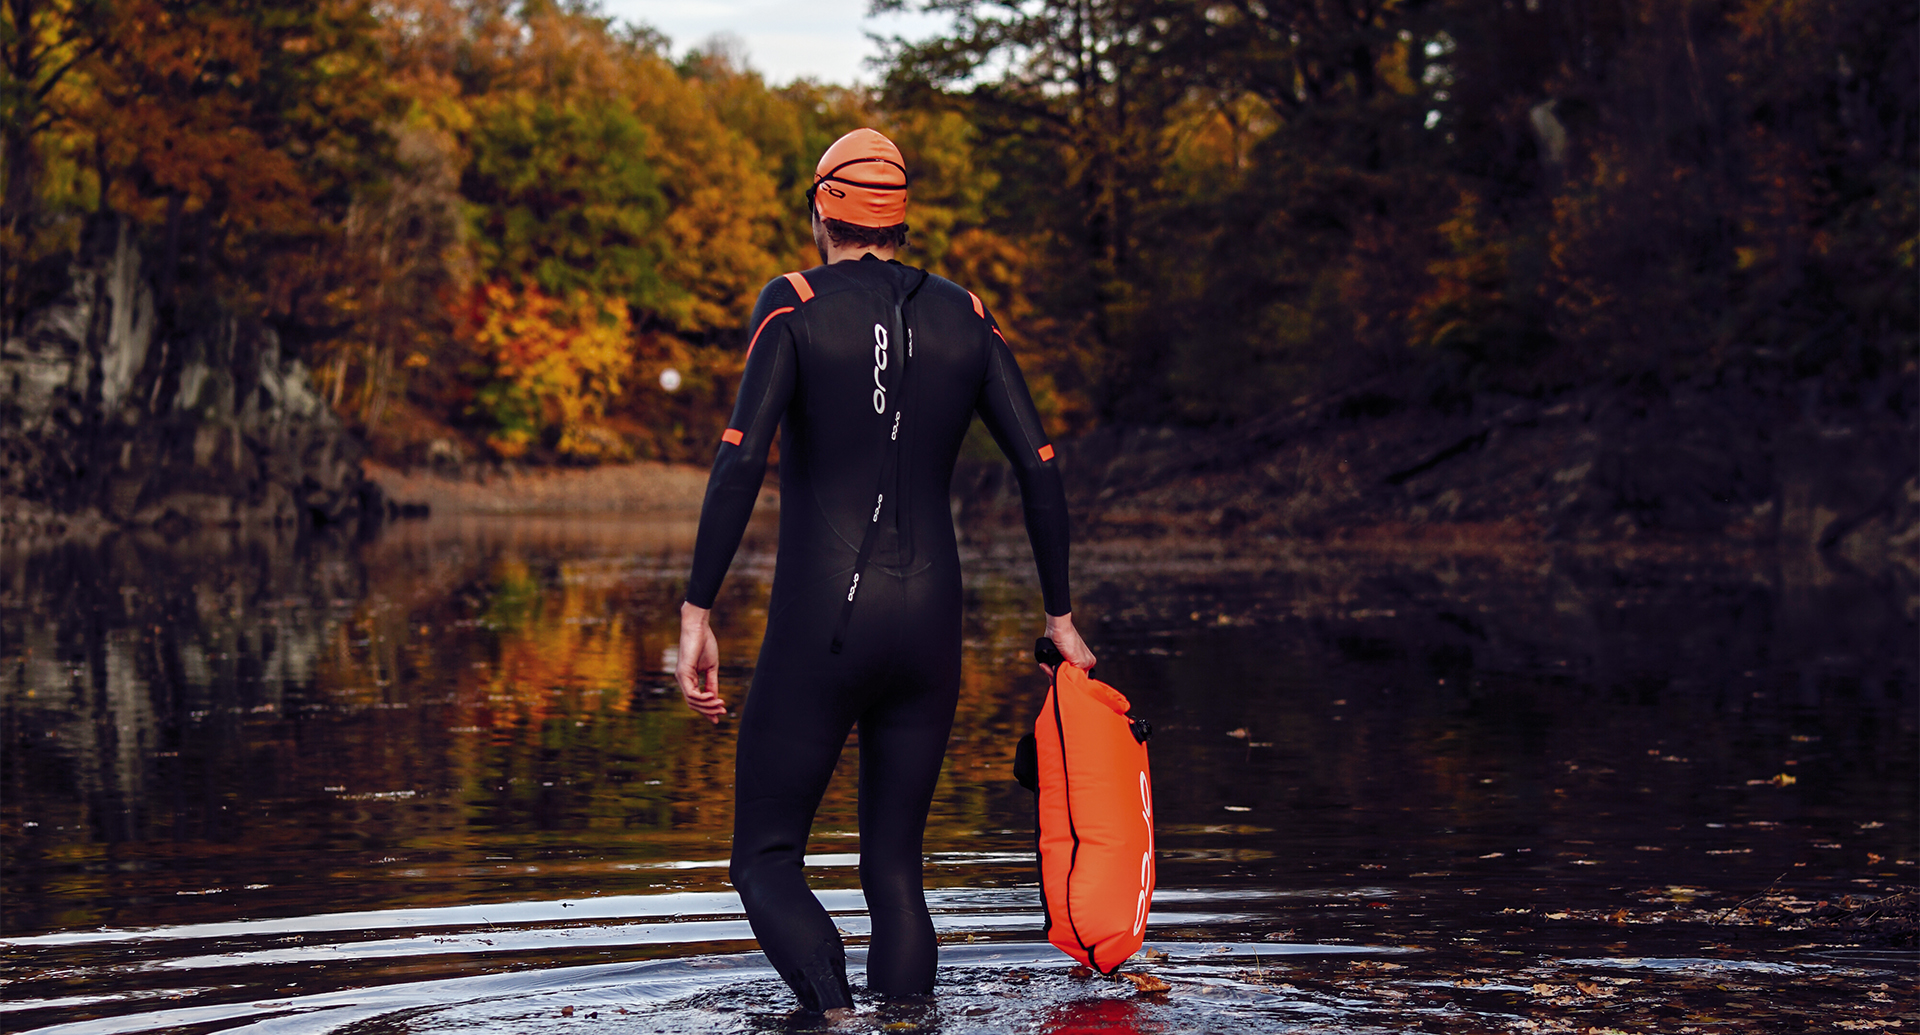 Choosing a wetsuit for open water swimming